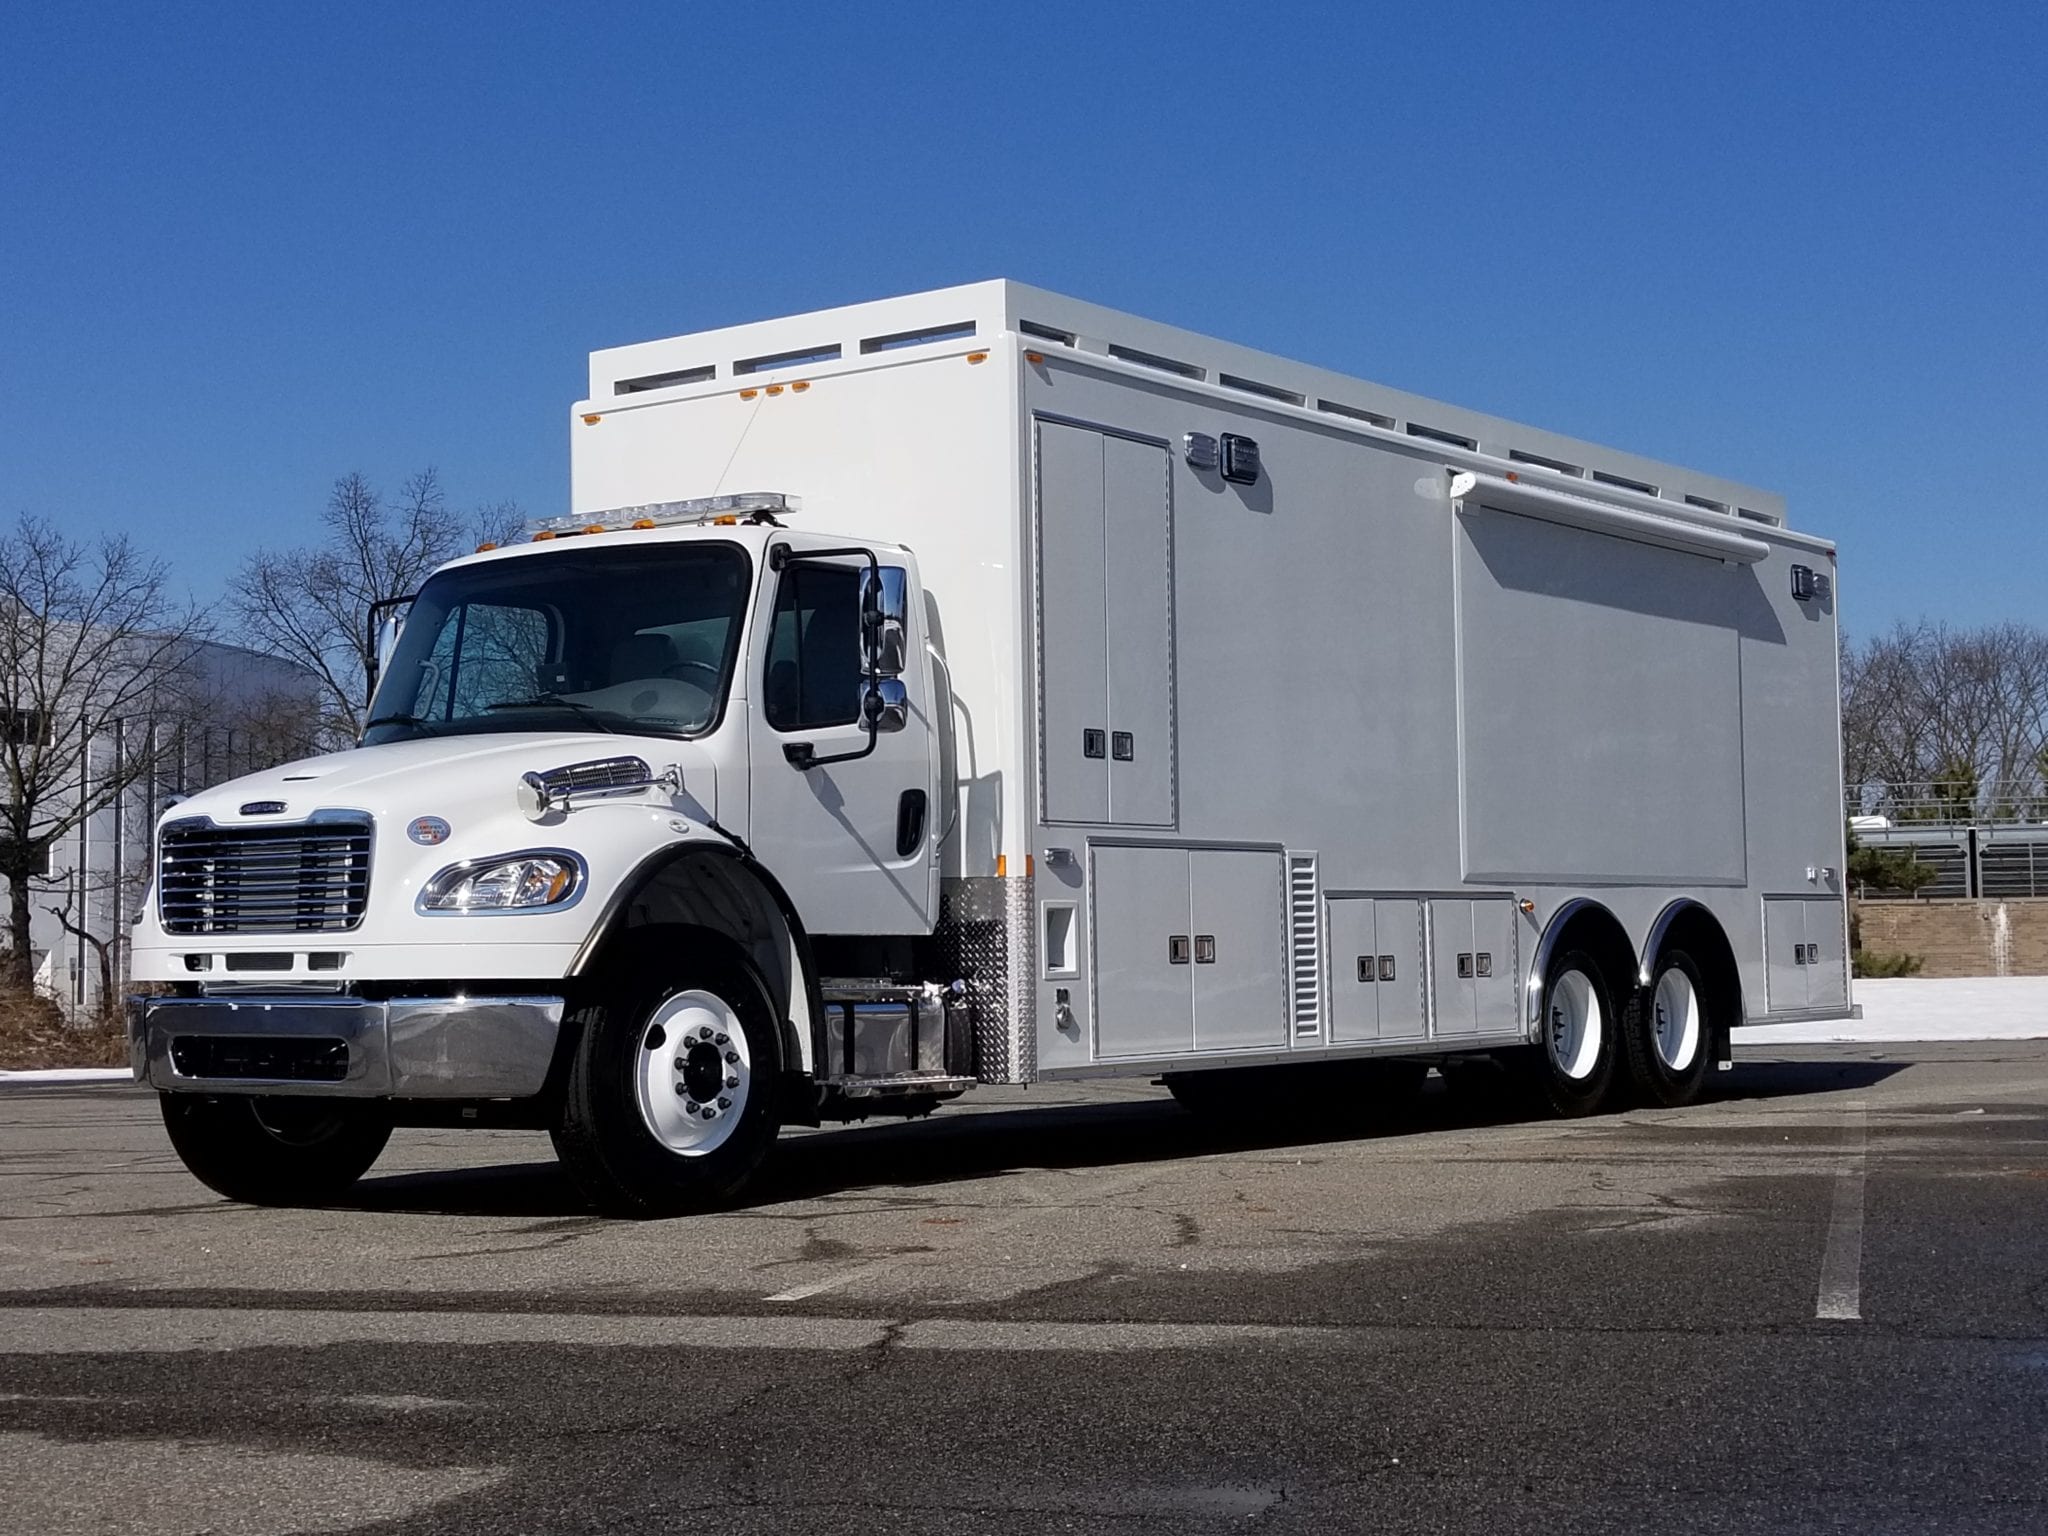 Pierce/Frontline Communication Command Vehicle delivered to the Count of  Middlesex Office of Emergency Management - FSS